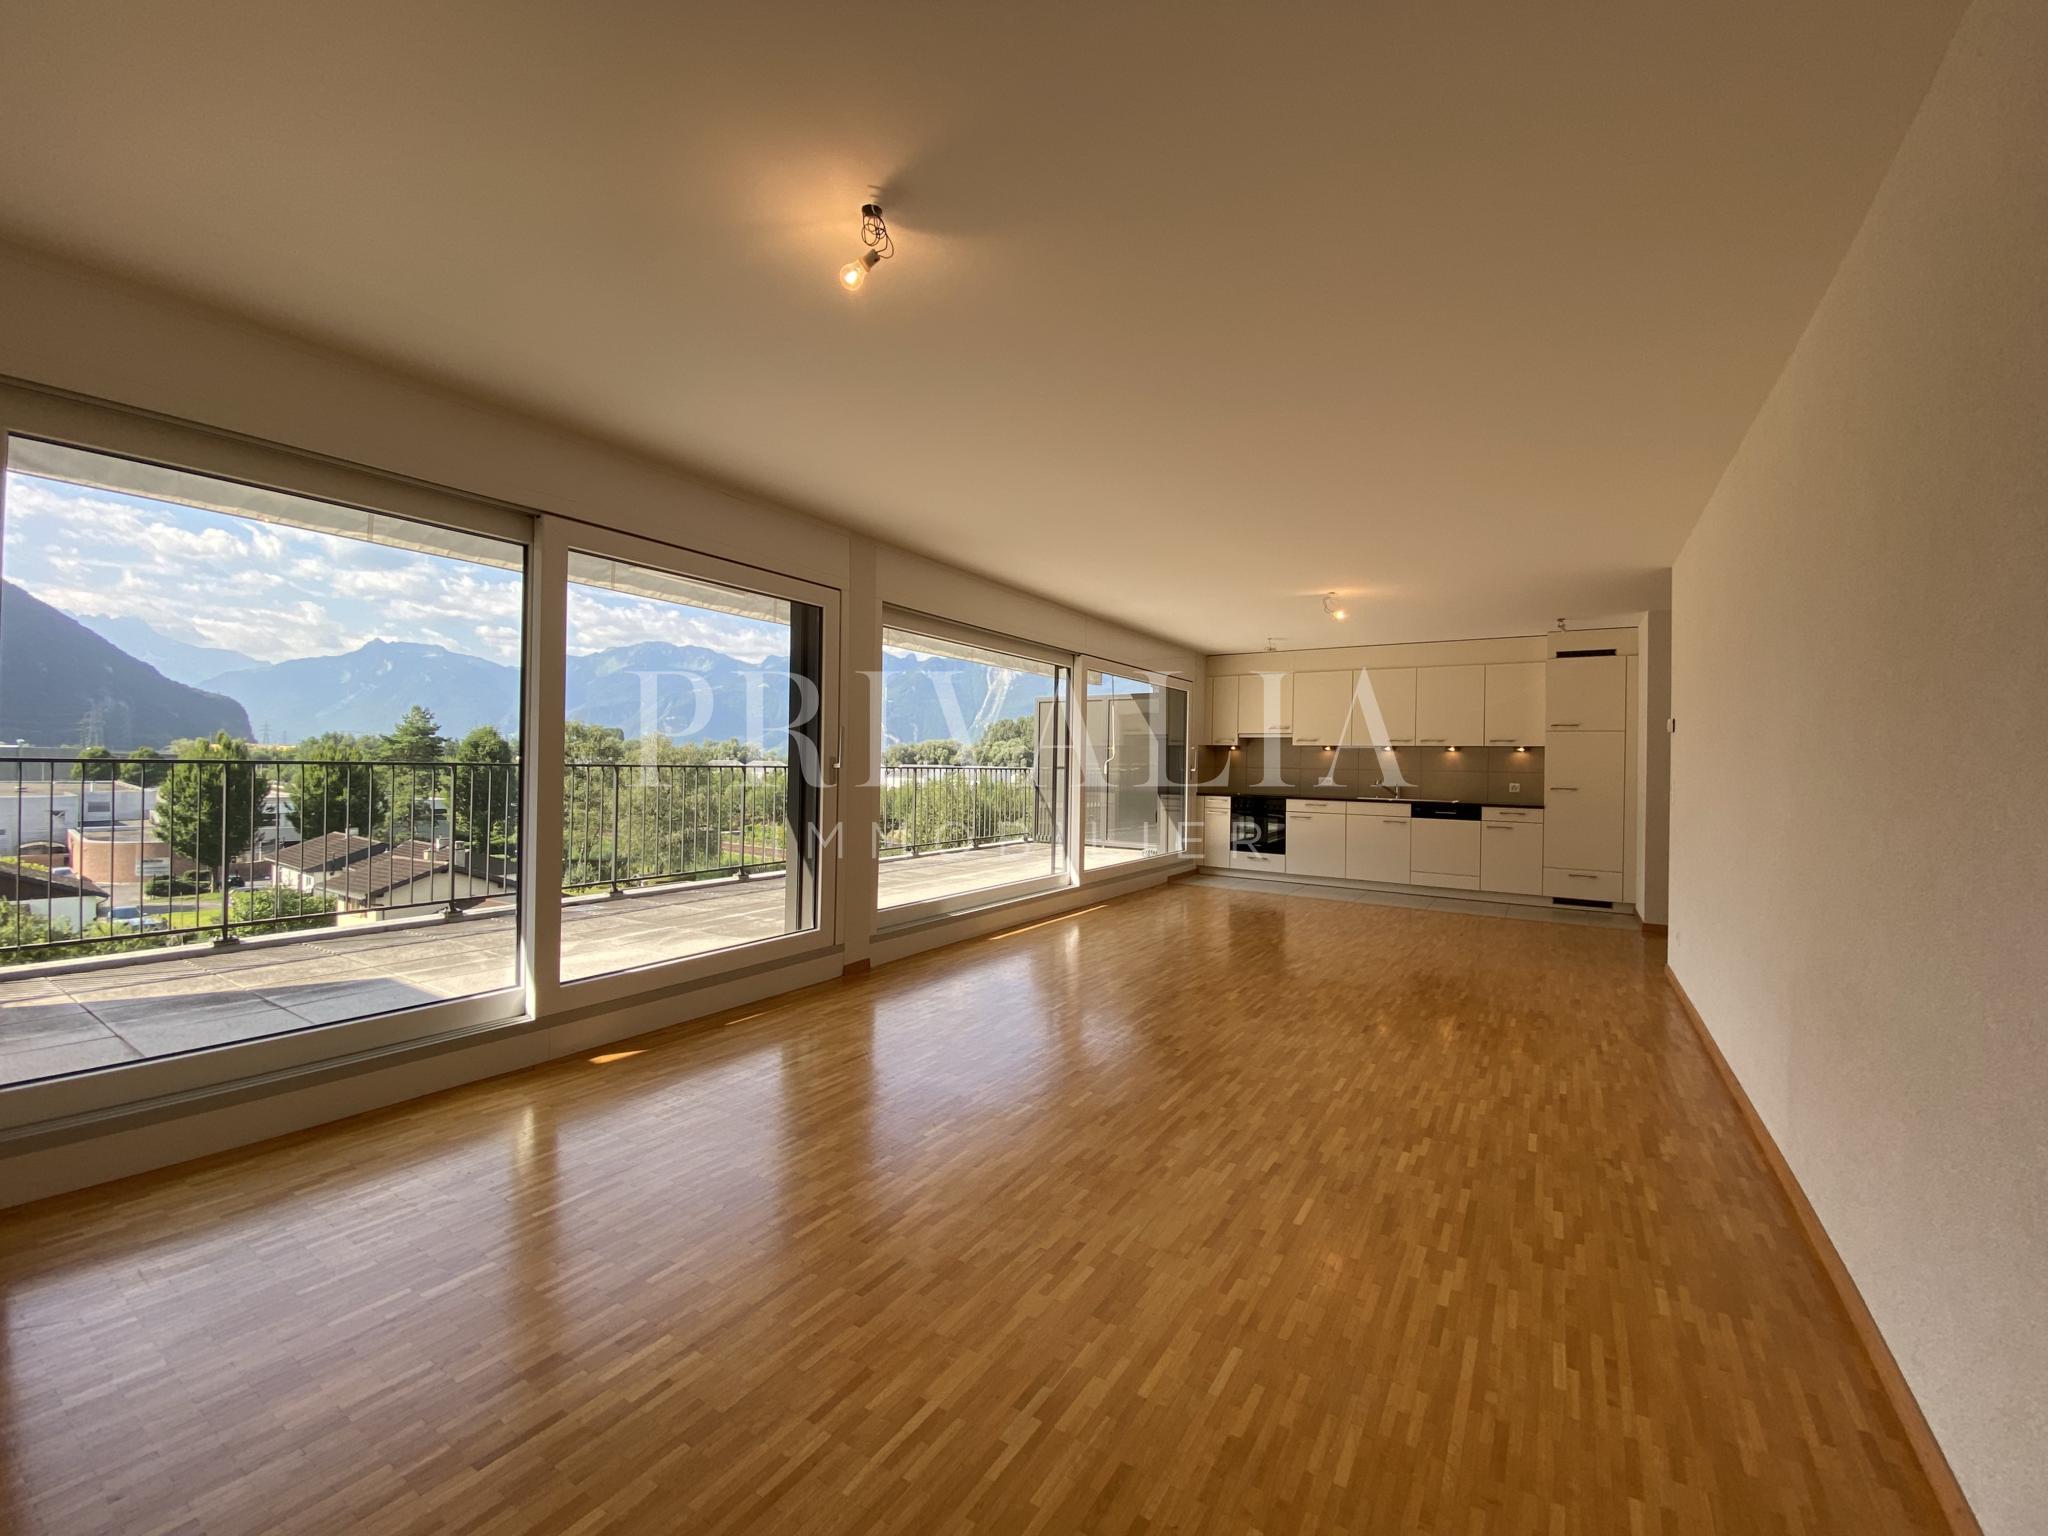 PrivaliaGorgeous penthouse with a terrace of approximately 25 m2